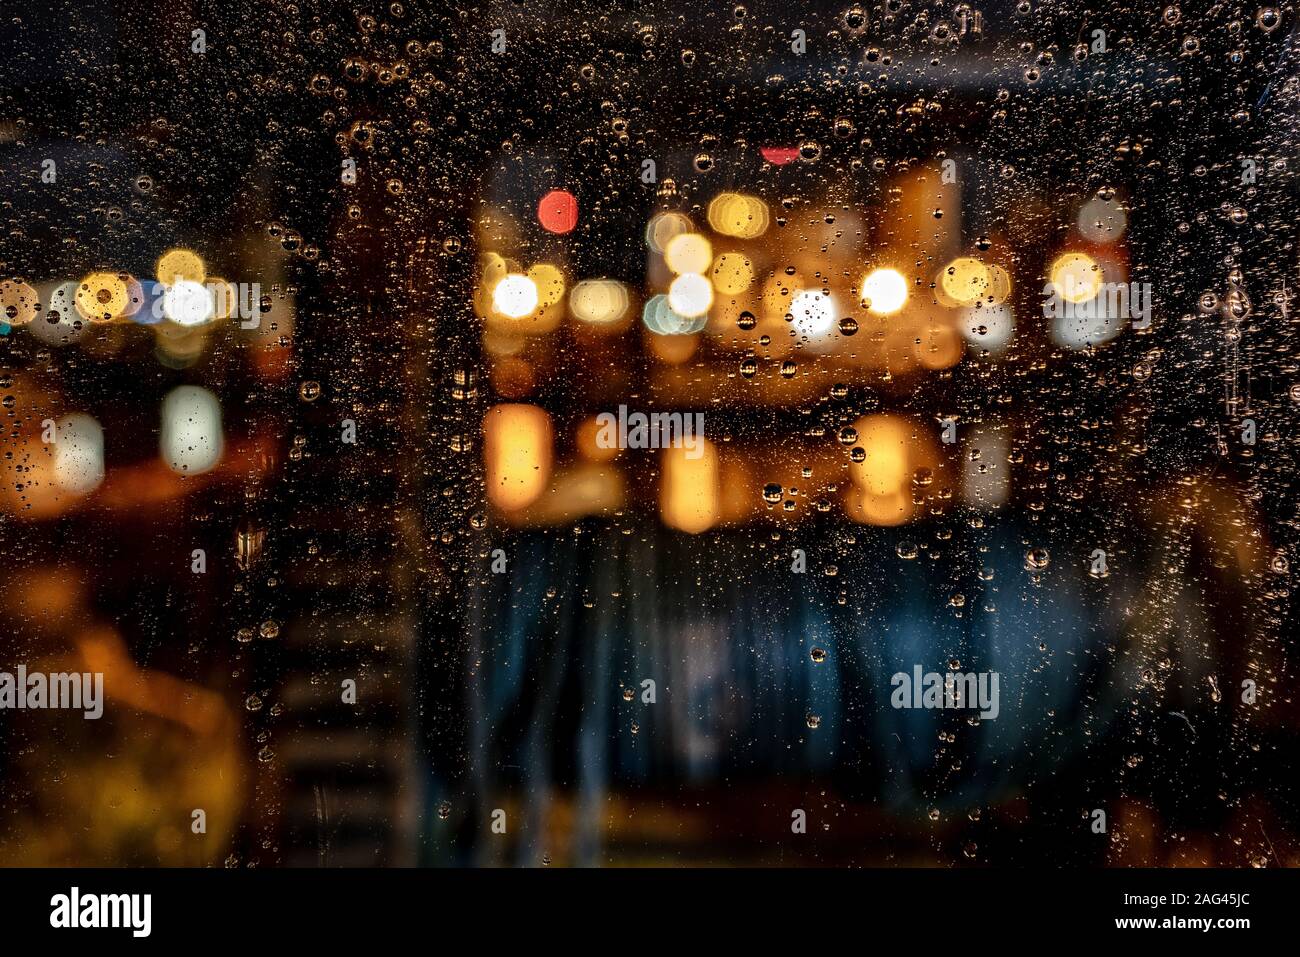 Beautiful shot of water drops on a window during a rainy night ...